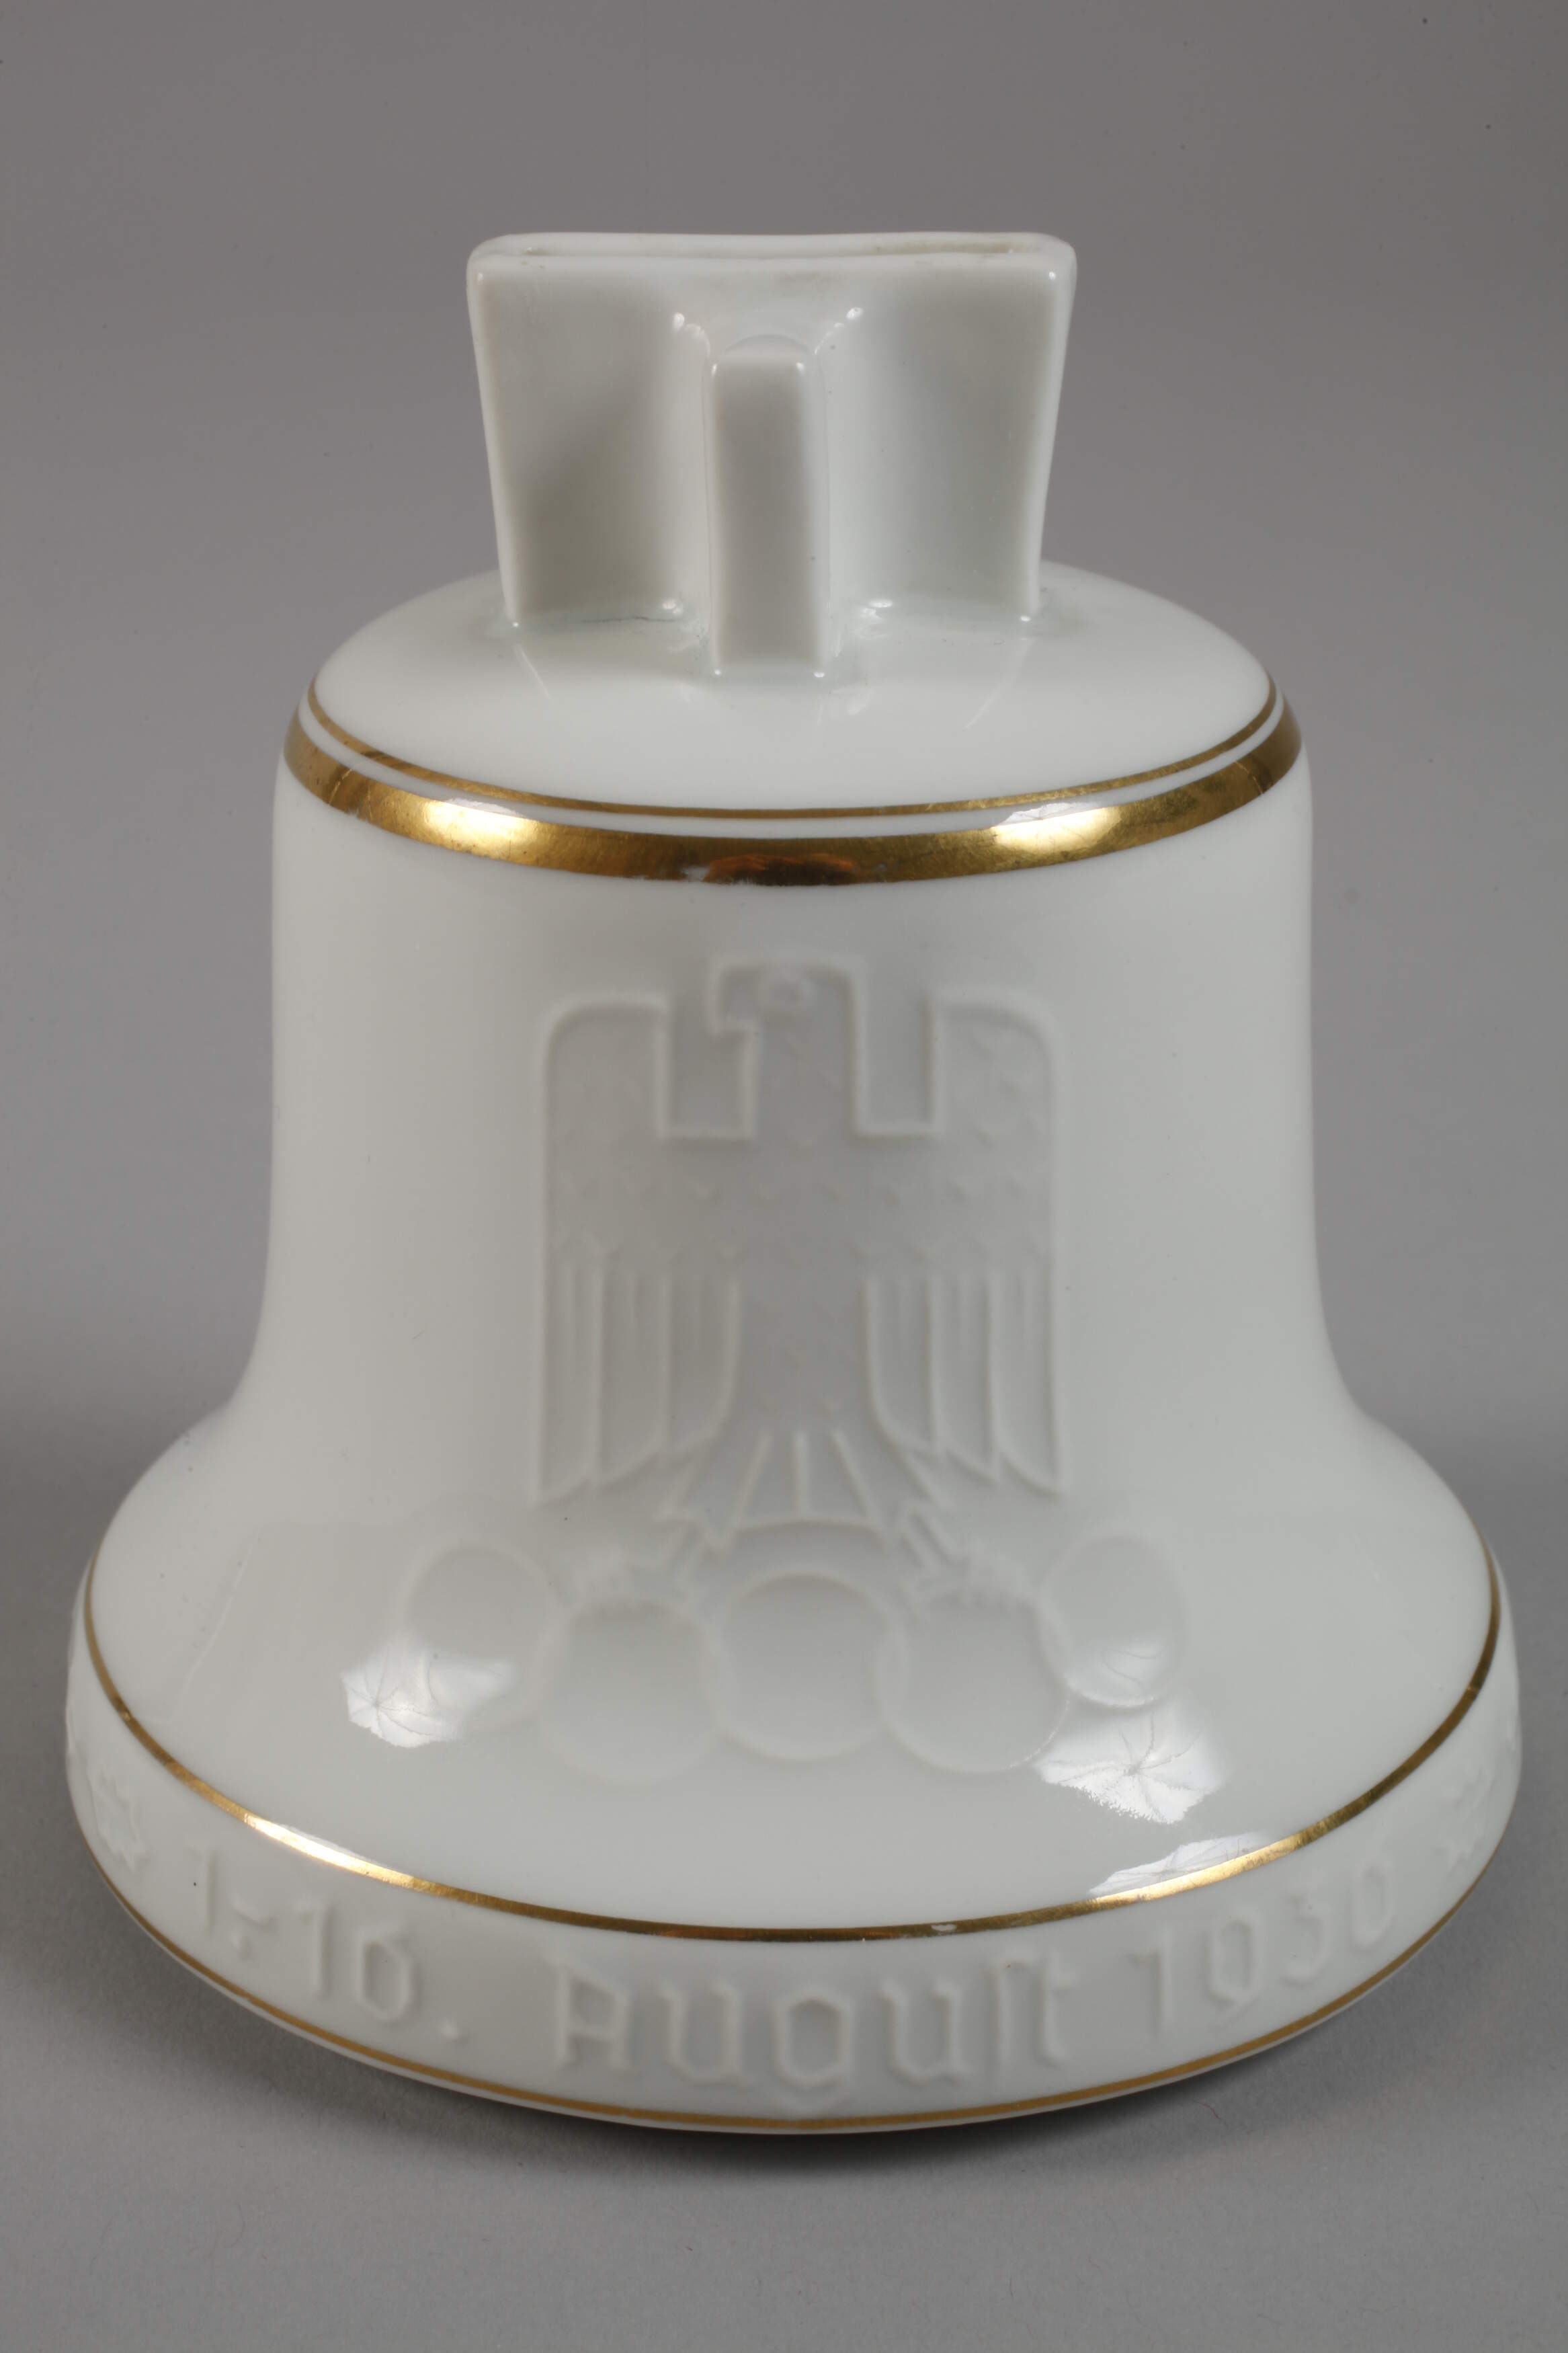 Porcelain bell Olympia 1936 - Image 2 of 5